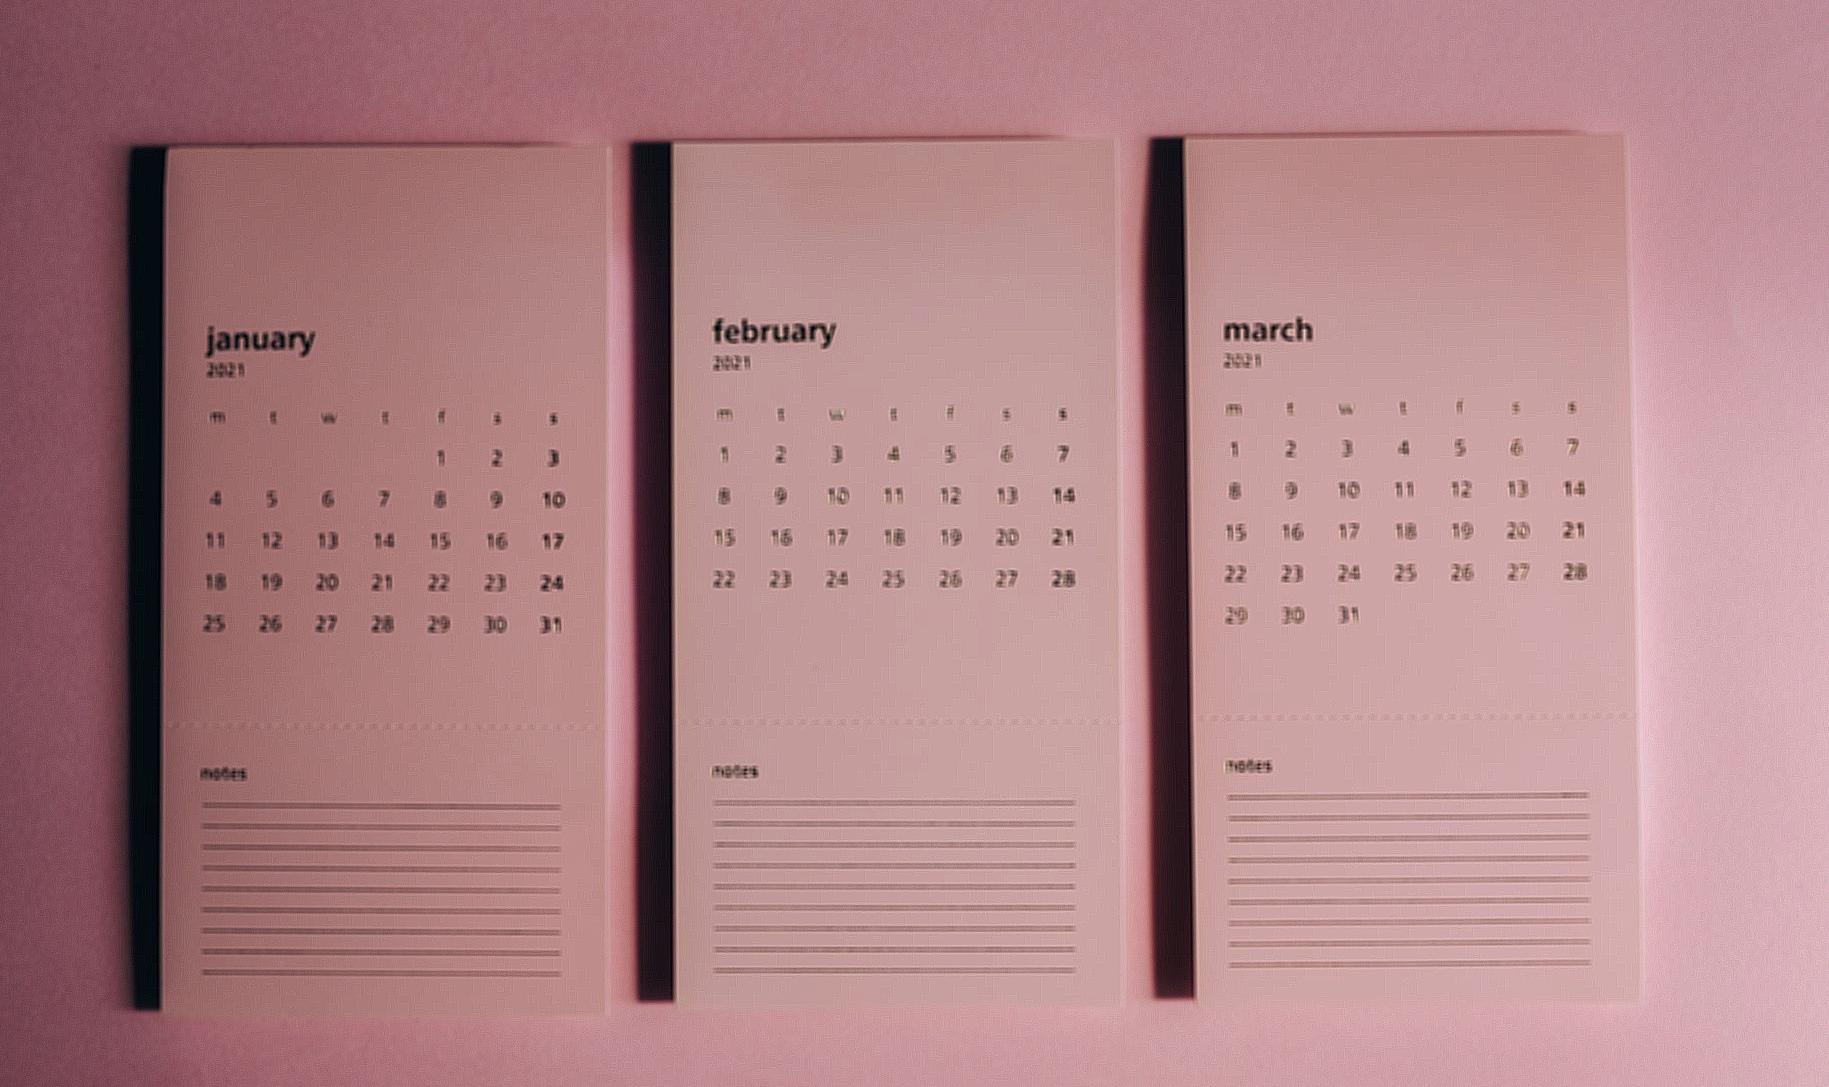 Set of monthly calendars with weekly dates